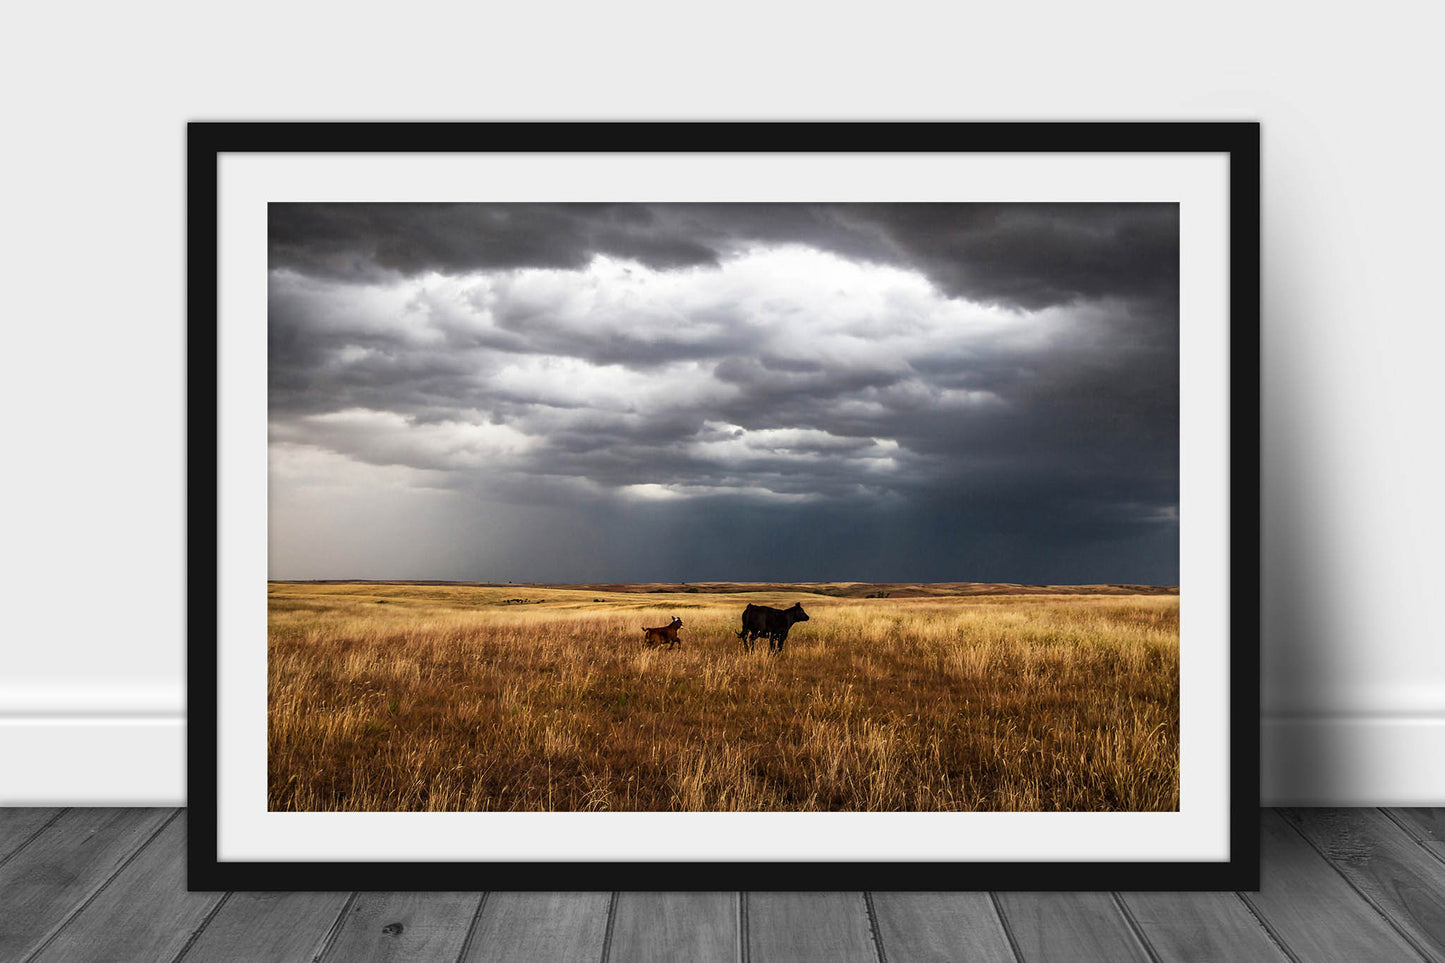 Framed and matted western photography print of a cow watching over a playful calf on a stormy day on the Oklahoma prairie by Sean Ramsey of Southern Plains Photography.